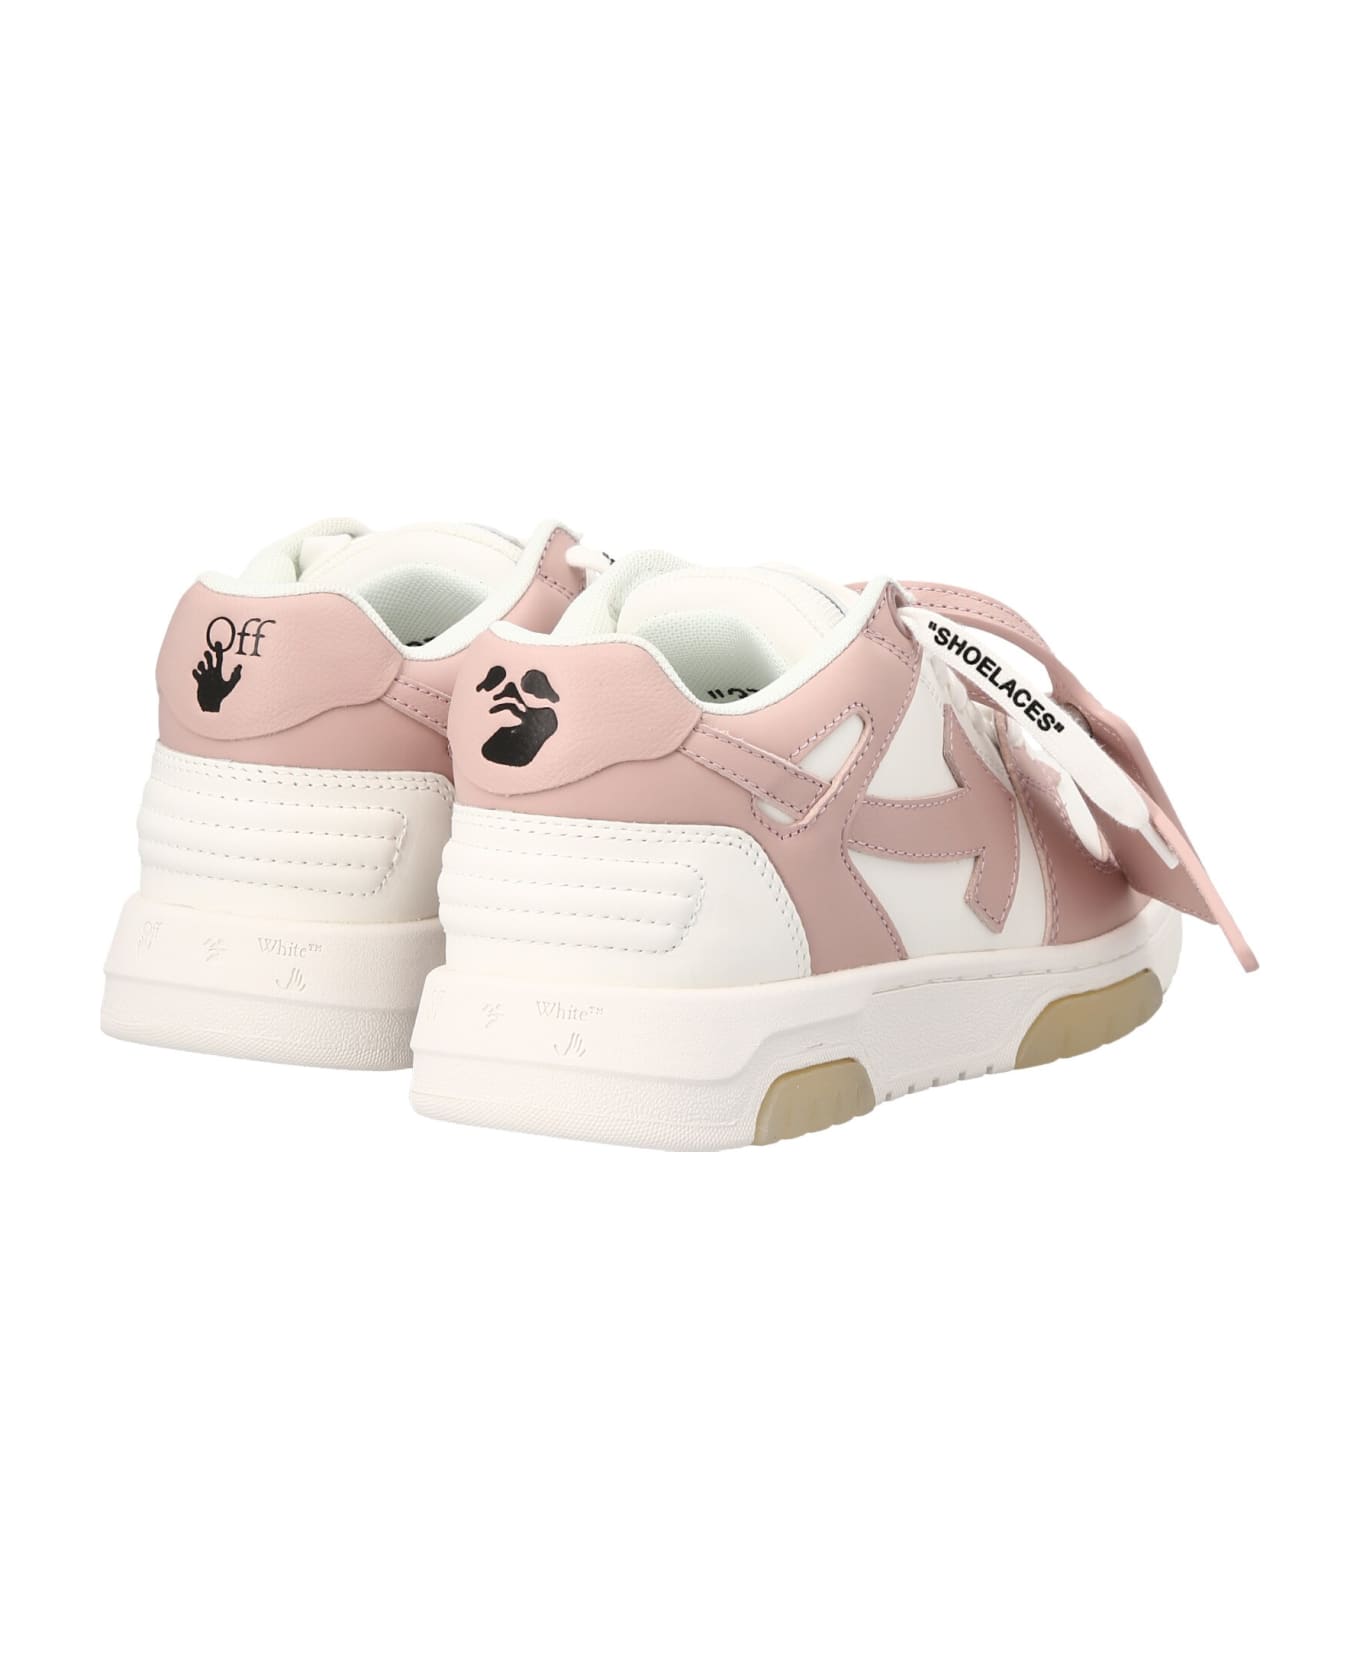 Off-White Eyu 'out Of Office' Sneakers - Pink